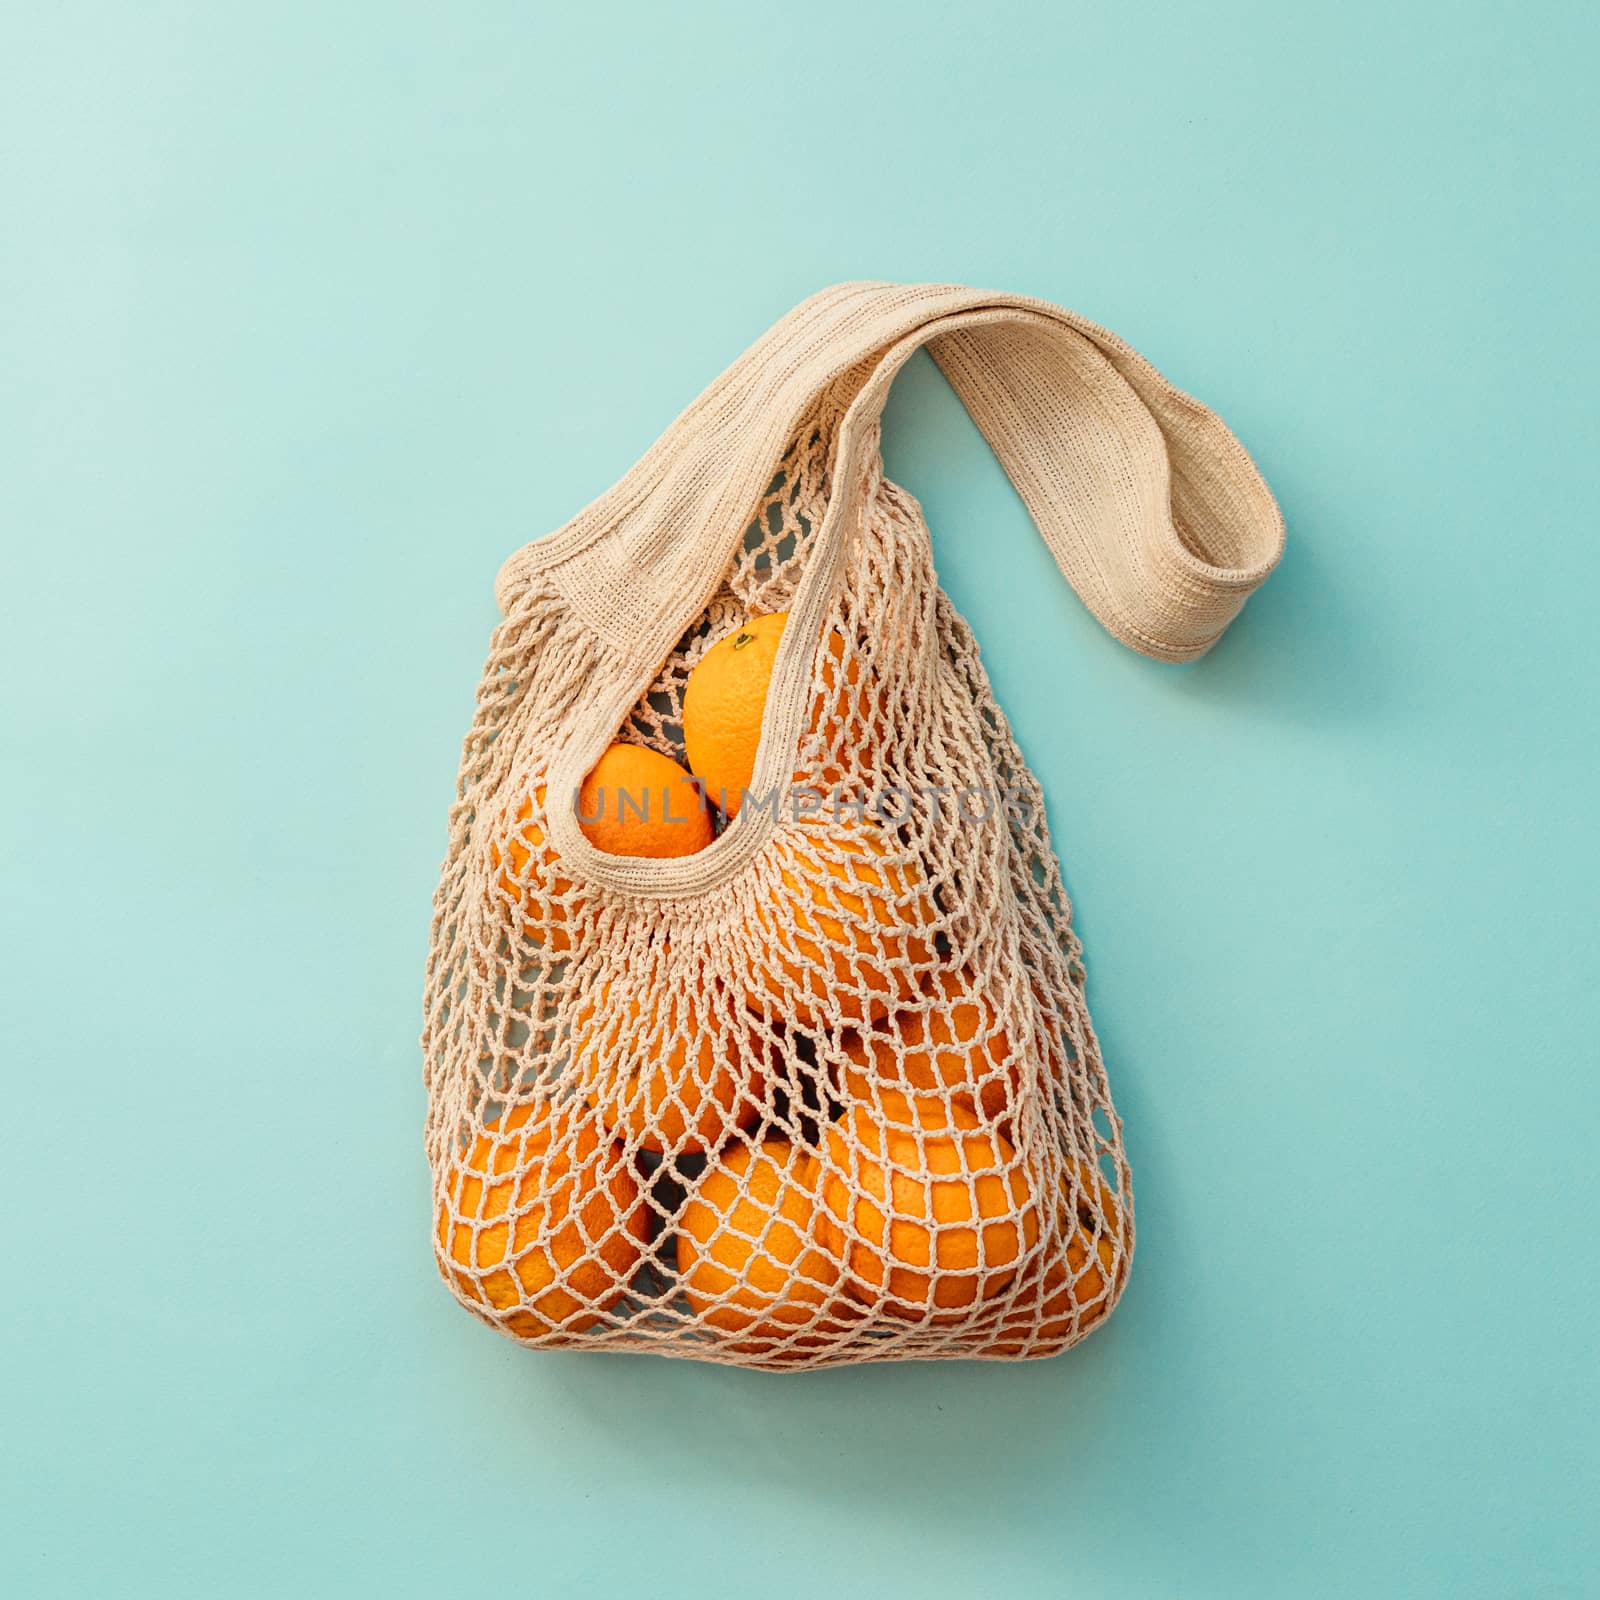 Mesh bag with fruits on blue background. Modern reusable shopping and zero waste concept. Square crop